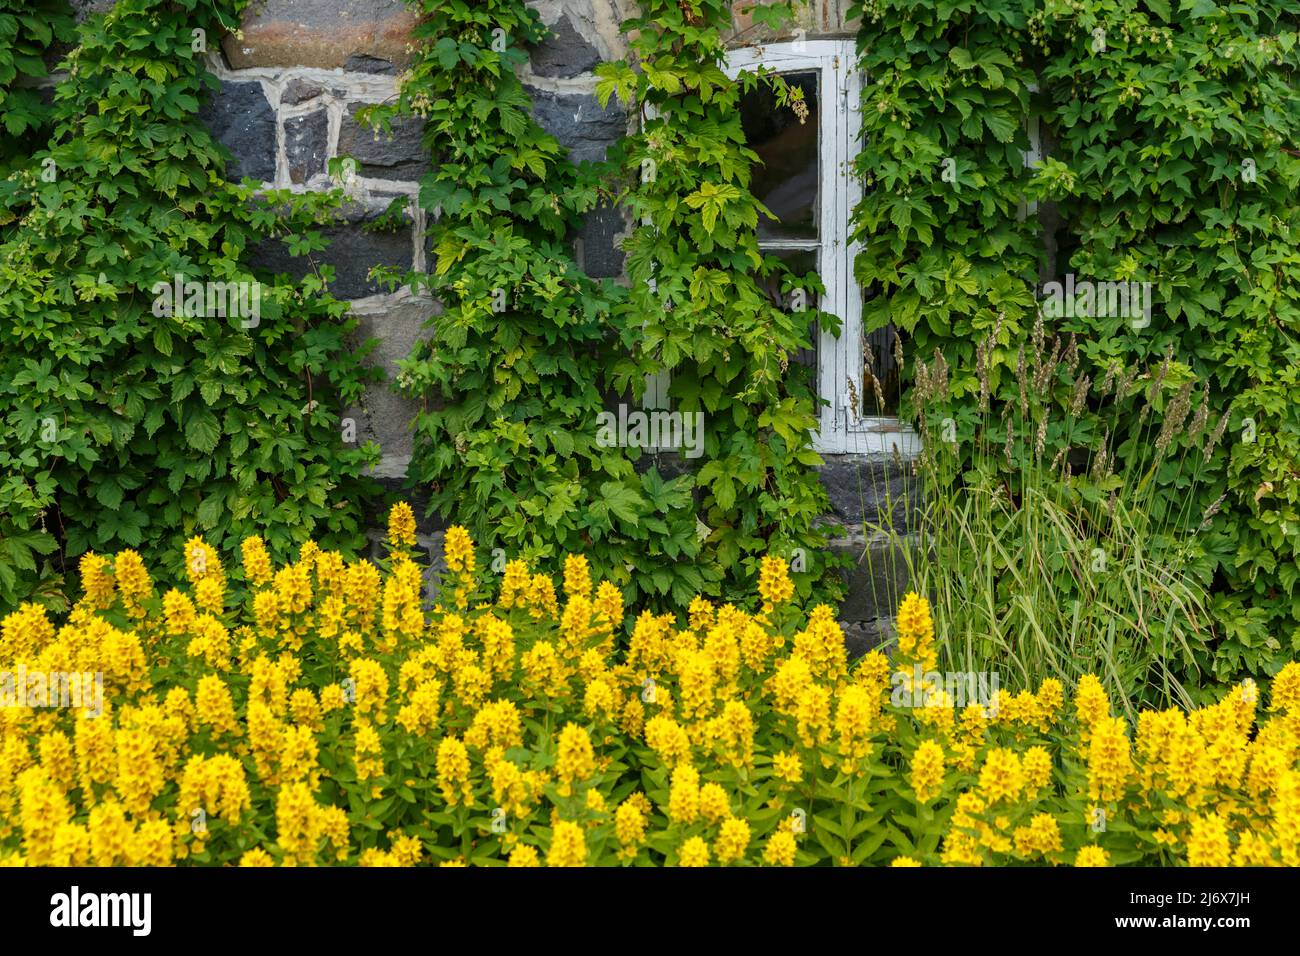 The facade of the house is immersed in greenery and yellow flowers, the white windows of the house, rural scene Stock Photo